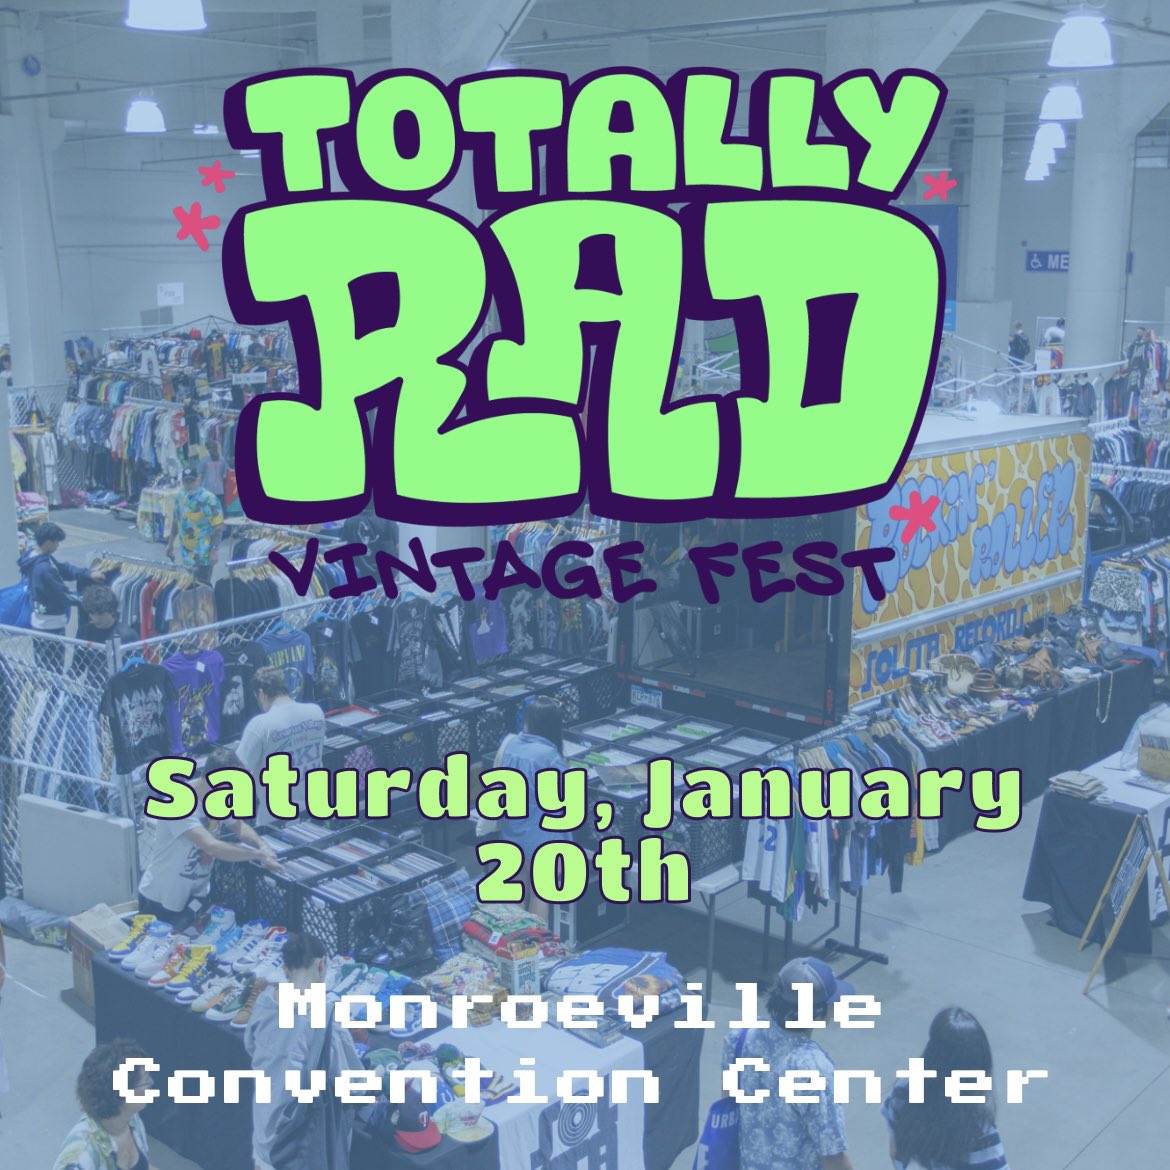 We’re looking at 80+ vendors at #TotallyRadVintageFest! Aside from vendors, they’re going to have Free-Play Vintage Arcade Rad Rewind Museum throwback photo ops Tix: $8 in advance, $12 at the door, $25 for early bird #vintage #pittsburgh #80s #90s #y2k #generationx #genx